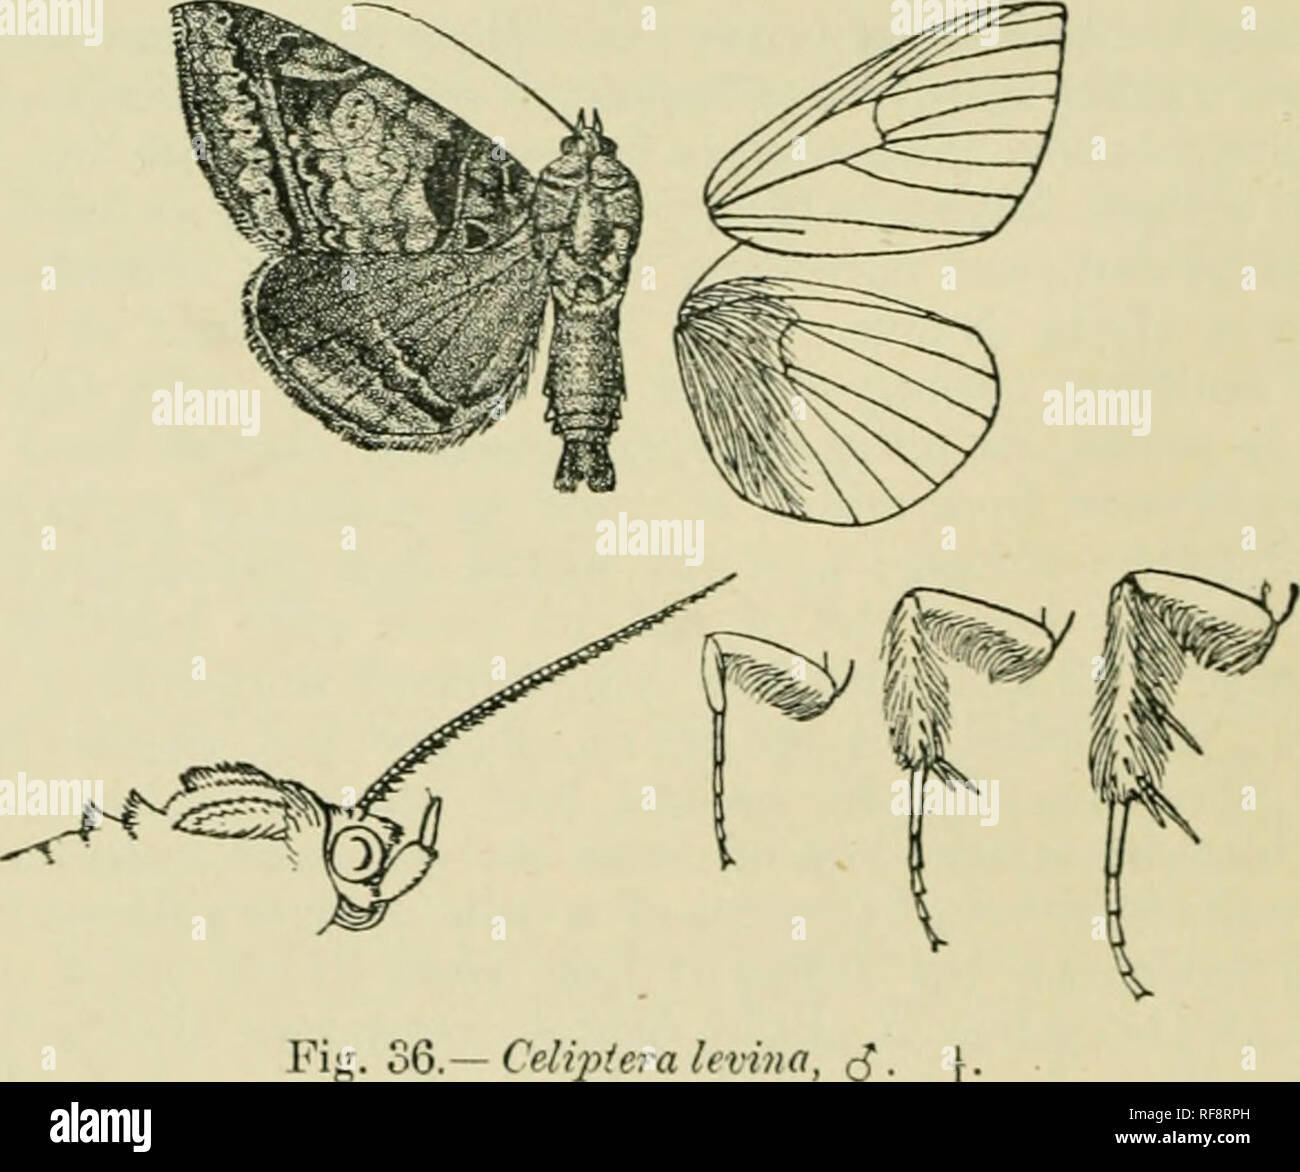 . Catalogue of Lepidoptera Phalaenae in the British Museum. Moths. 132 NOCTUIDJ'. {Rogers), IS, Godman-Salvin Coll.; Peru, Uruhuasi (Watkins), i 2 â Exp- 60-70 millim. The species is named parallelipipeda on Guen^e's plate in error and the localit&gt;&quot; is given as Centr. India. 7913. Celiptera levina. Phaltena levina, Stoll, Cram. Pap. Exot. iv. p. 108, pi. 346, f. D (1781); Stoll, Cram. Pap. Exct. v. p. 160, pi. 30. f. 2 ; Diuce, Biol. Centr.-Am., Het. i. p. 387. Mochaitrinia, Geyer, Zutr. ex. Scliuiett. 4. p. SO. ff. 729, 730 (1832). Mods ahiiia, Giien. Noct. iii. p. 310 (1852). Mocis p Stock Photo